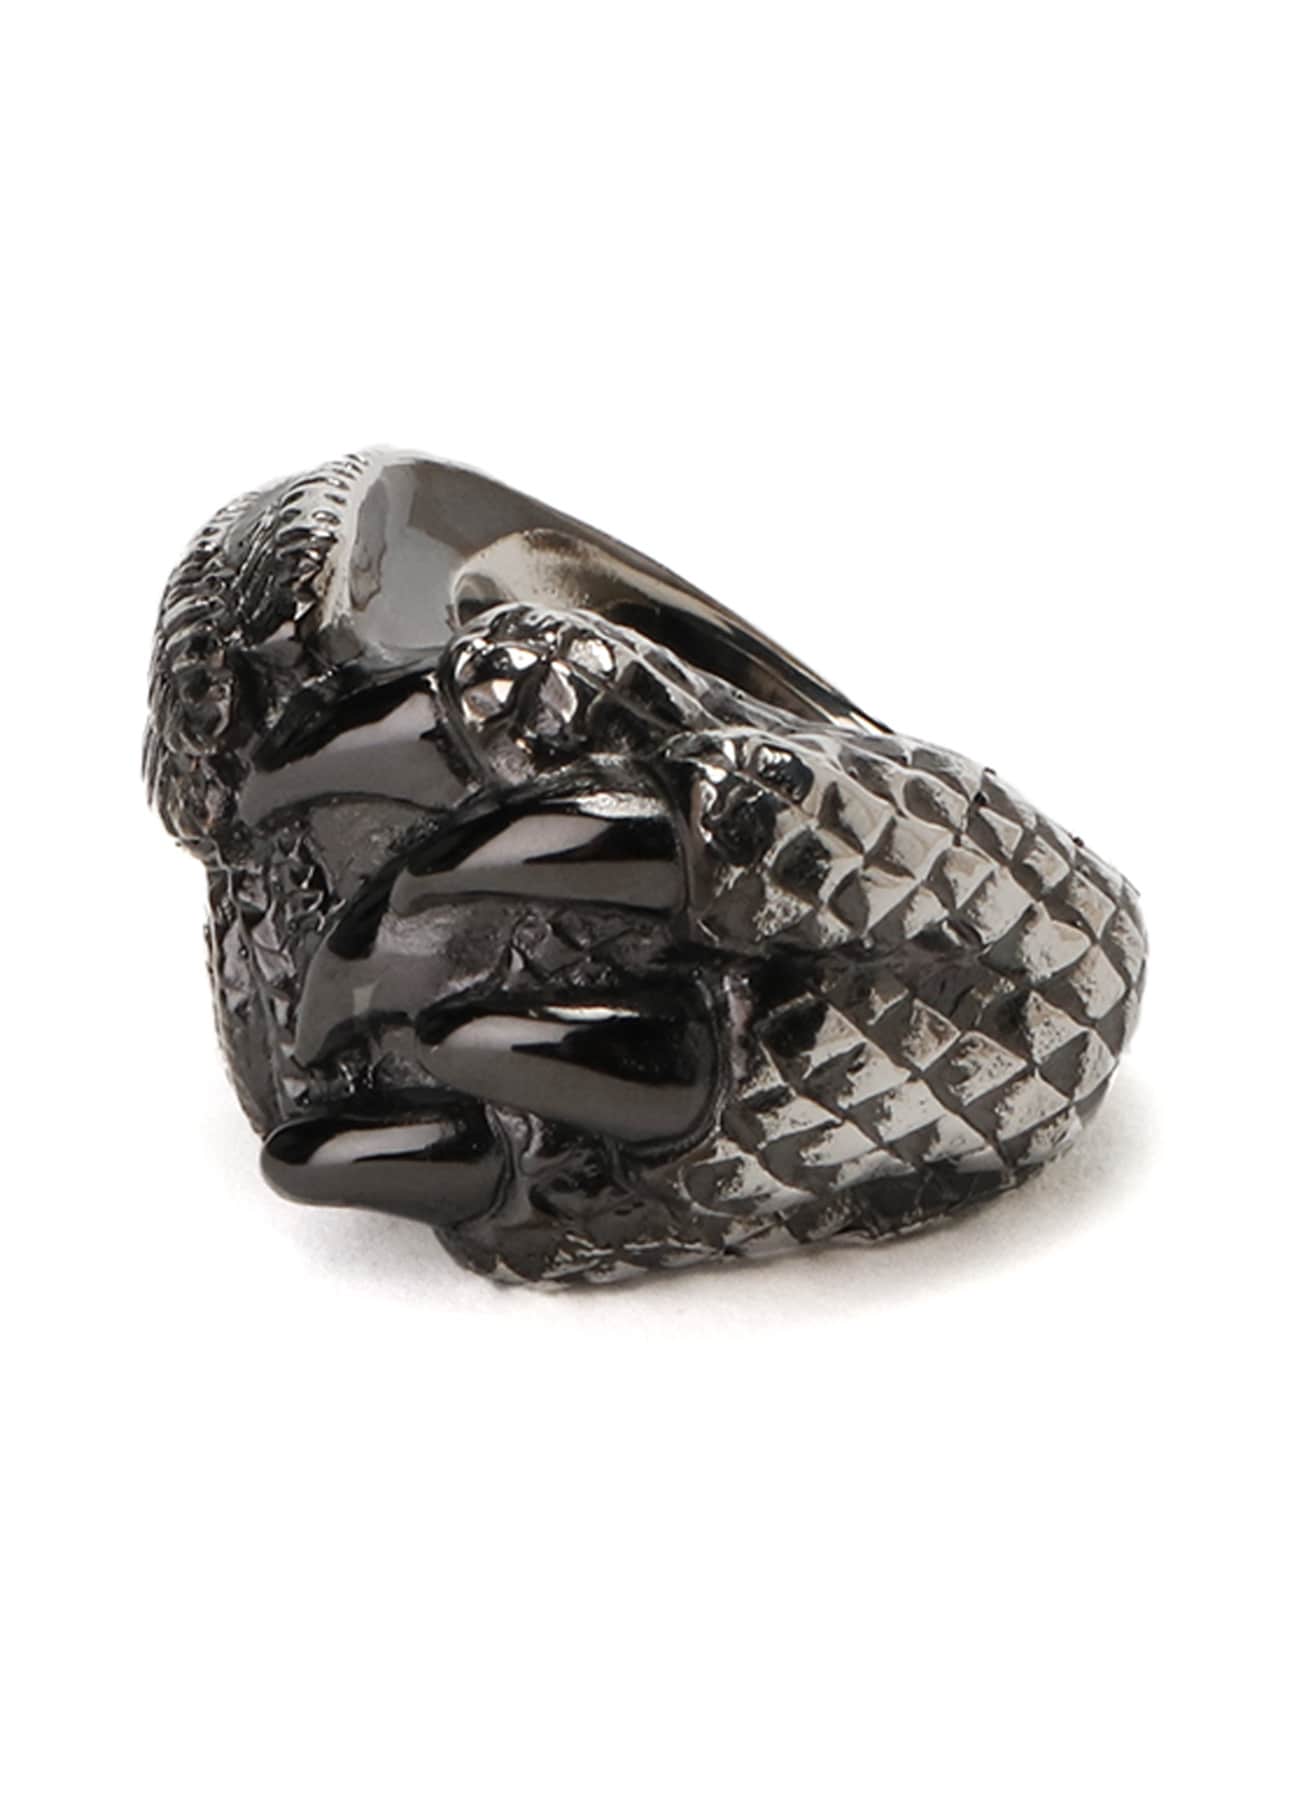 SILVER 950 DRAGON CLAW FEATHER RING